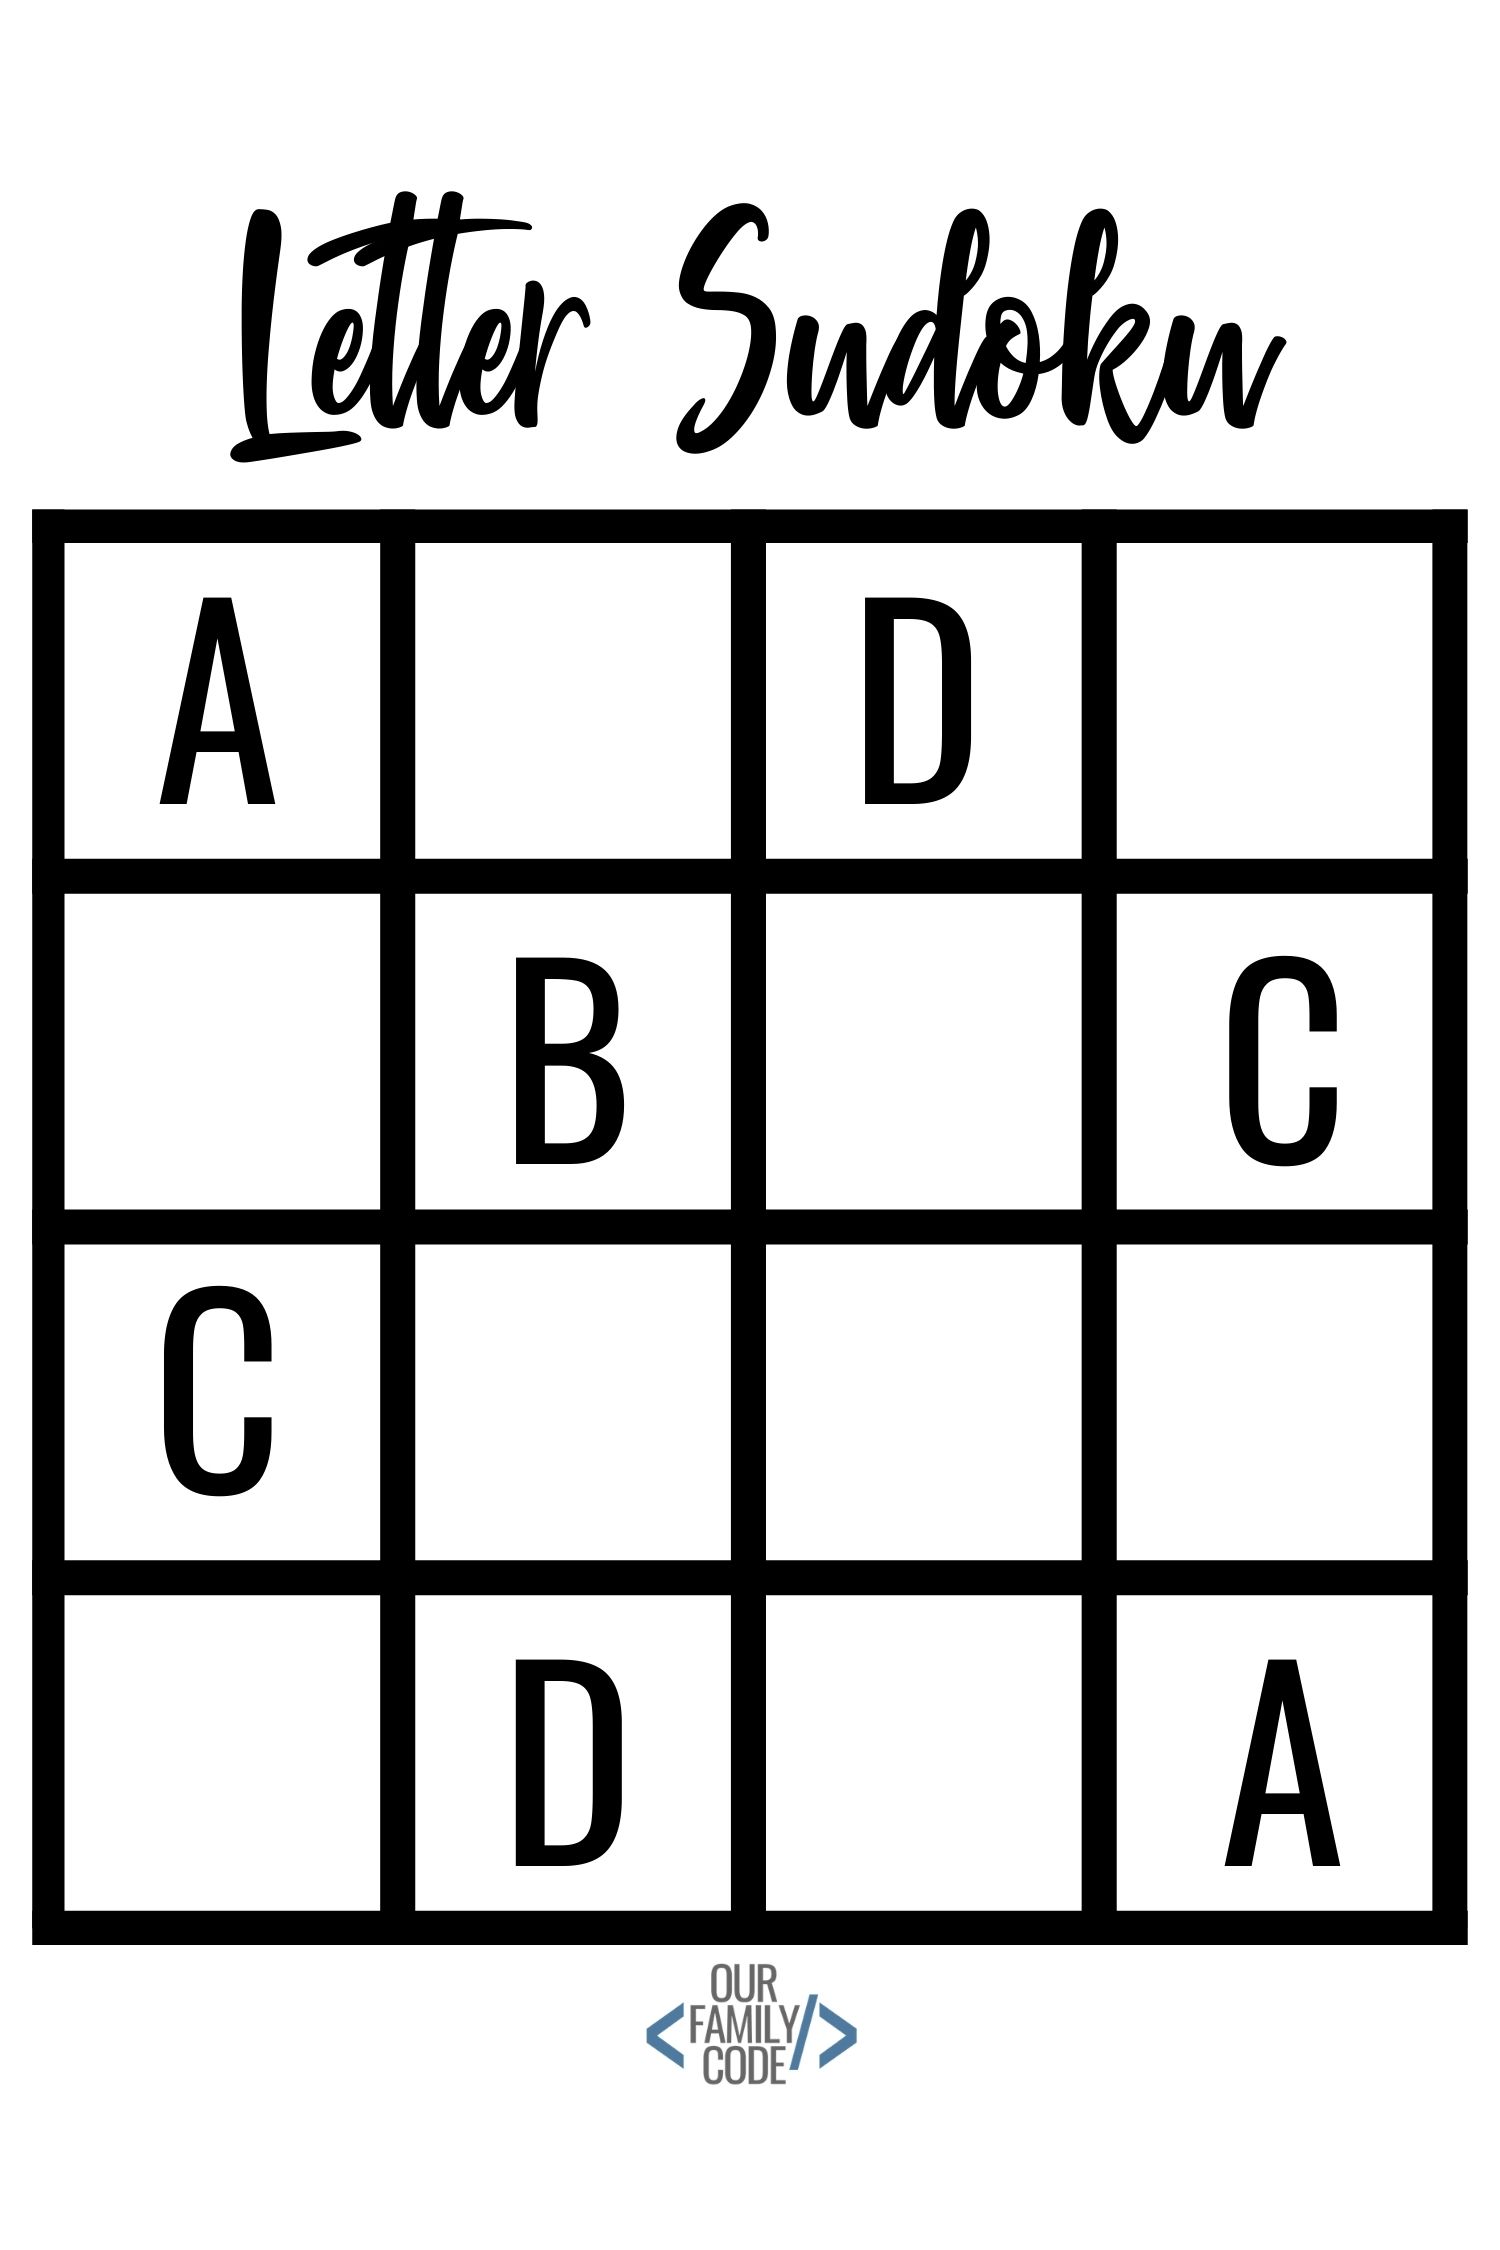 This Letter Sudoku activity is a way to introduce kids as young as preschool to the rules and the use of logical reasoning to solve a problem. #STEAM #STEM #teachkidstocode #computationalthinking #algorithms #logicalreasoning #homeschool #sudokuforkids